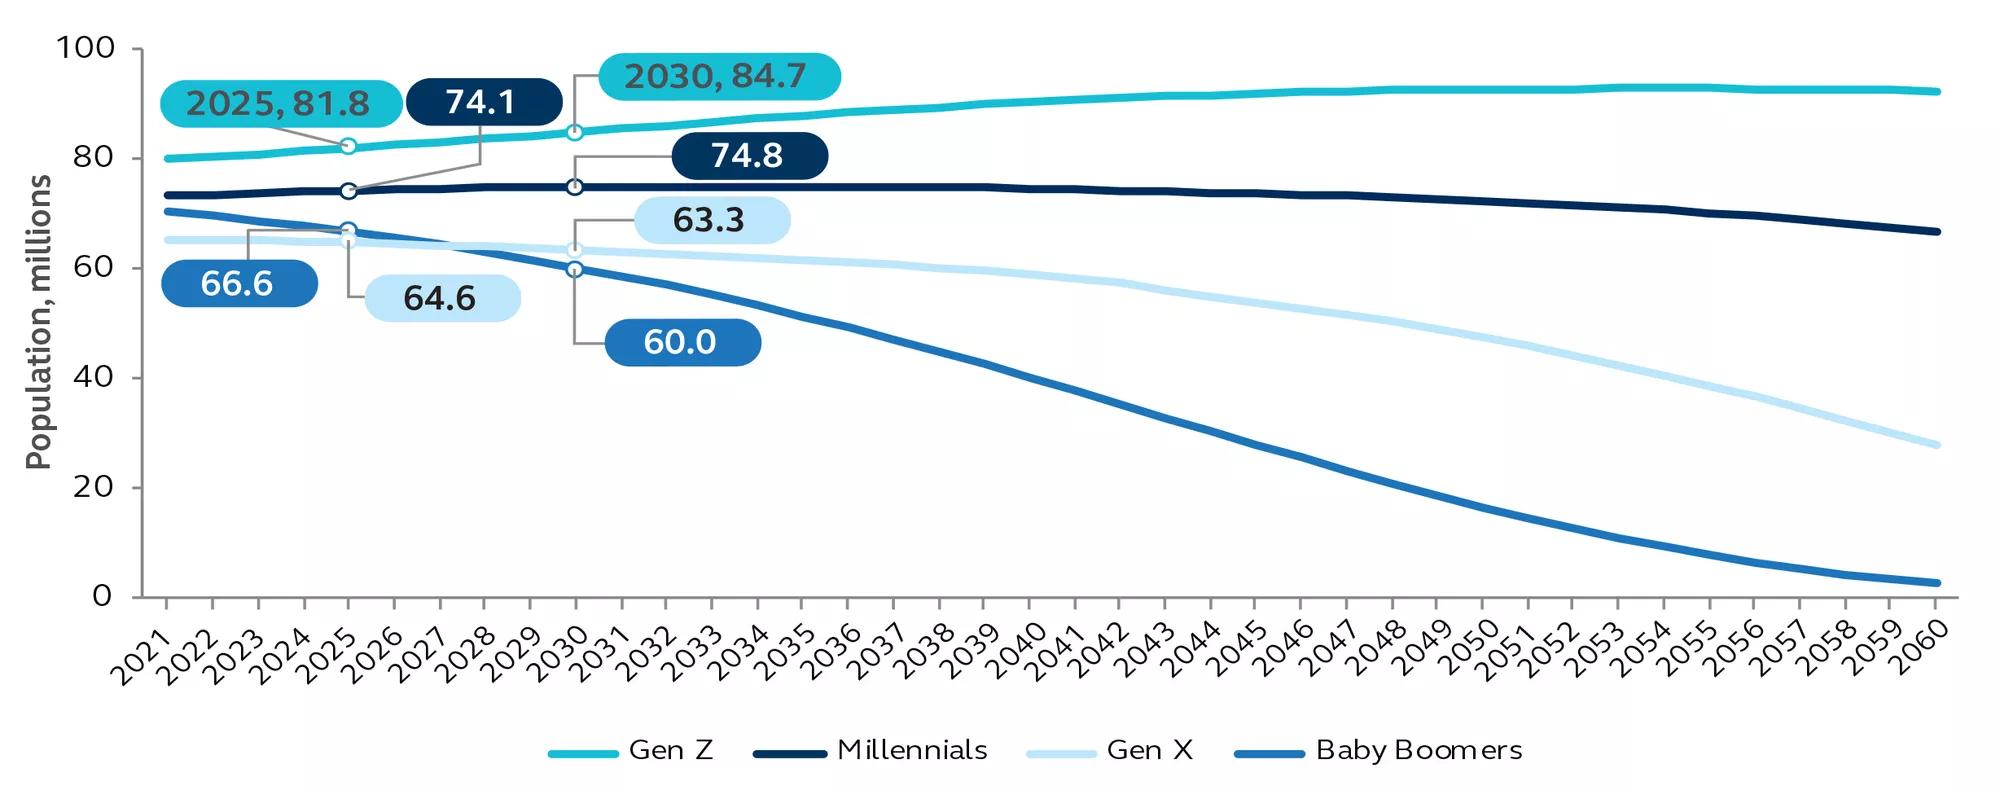 Forecasted time series chart from 2021 to 2060 showing population by generation